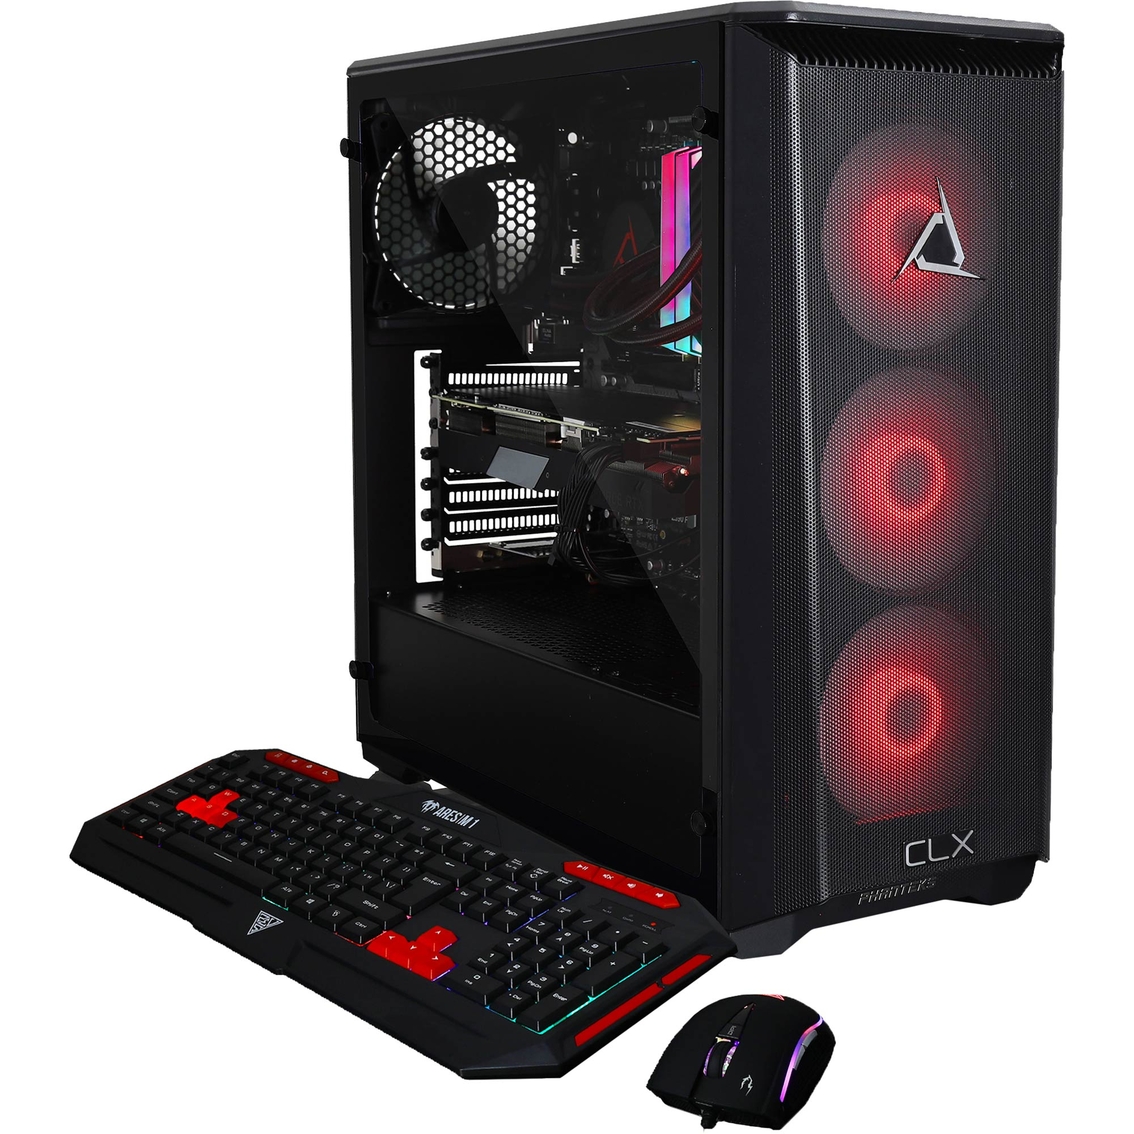 which build is better? one is from ibuypower and the other CLX